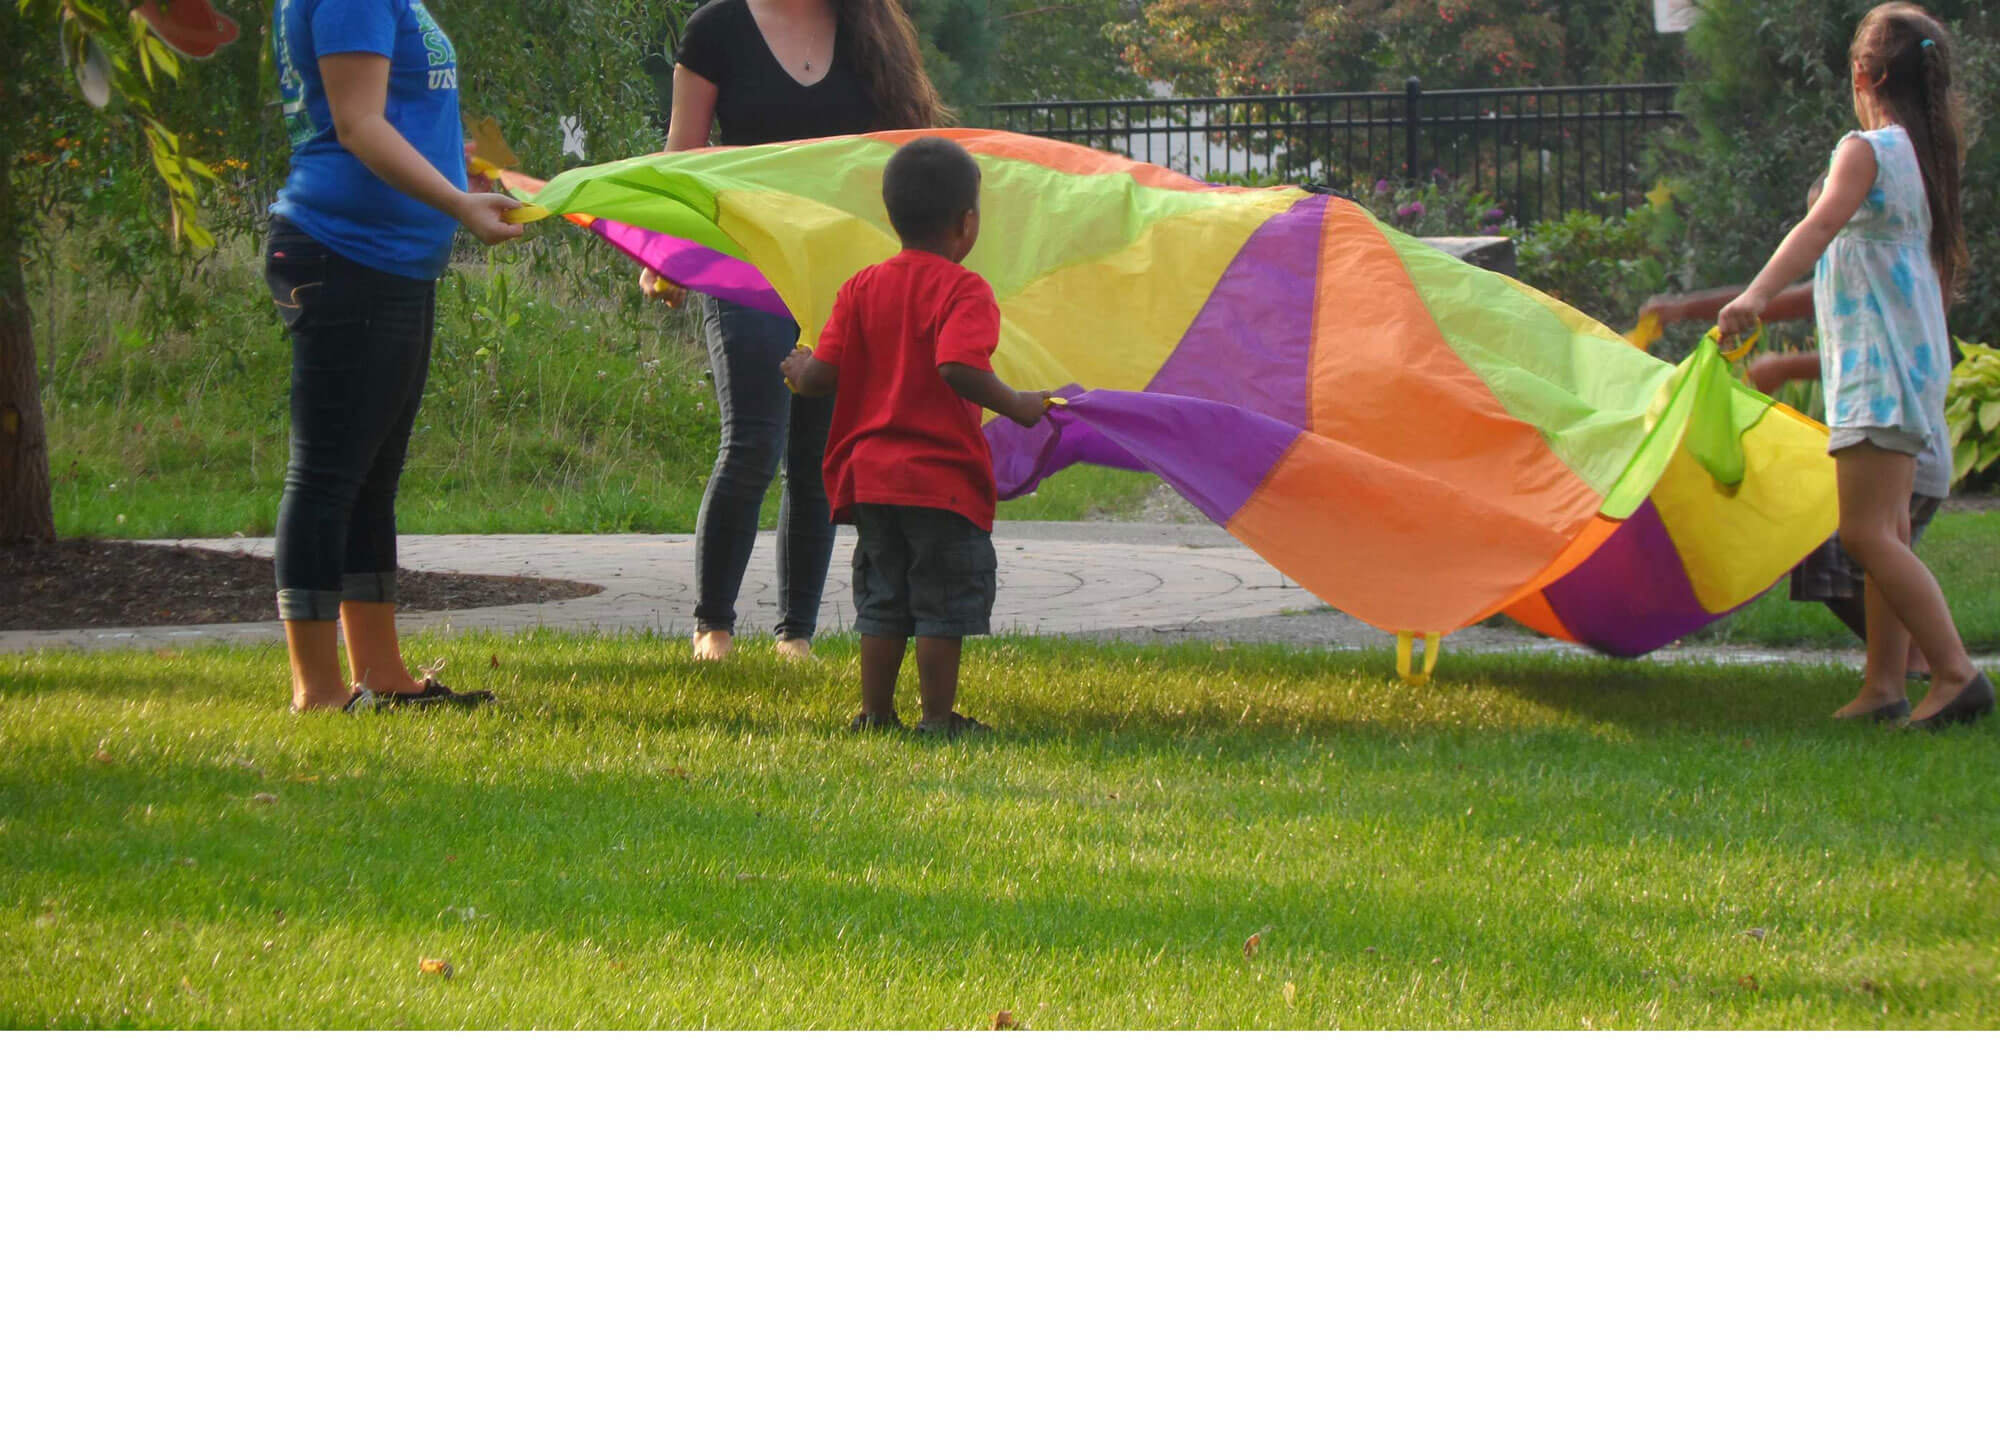 children playing with a parachute